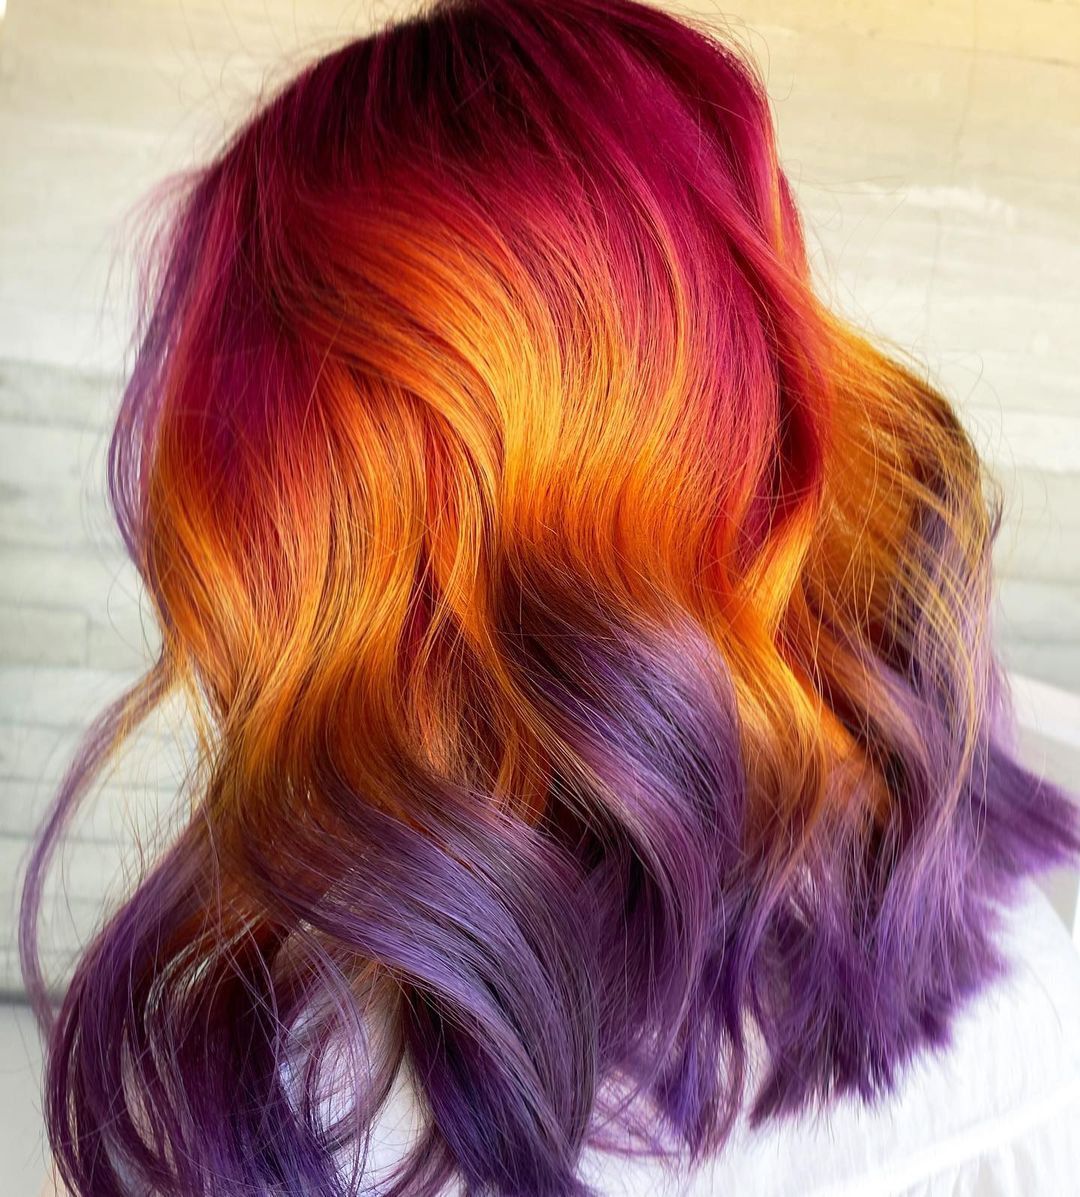 Red, Yellow and Purple Ombre Medium Length Hair